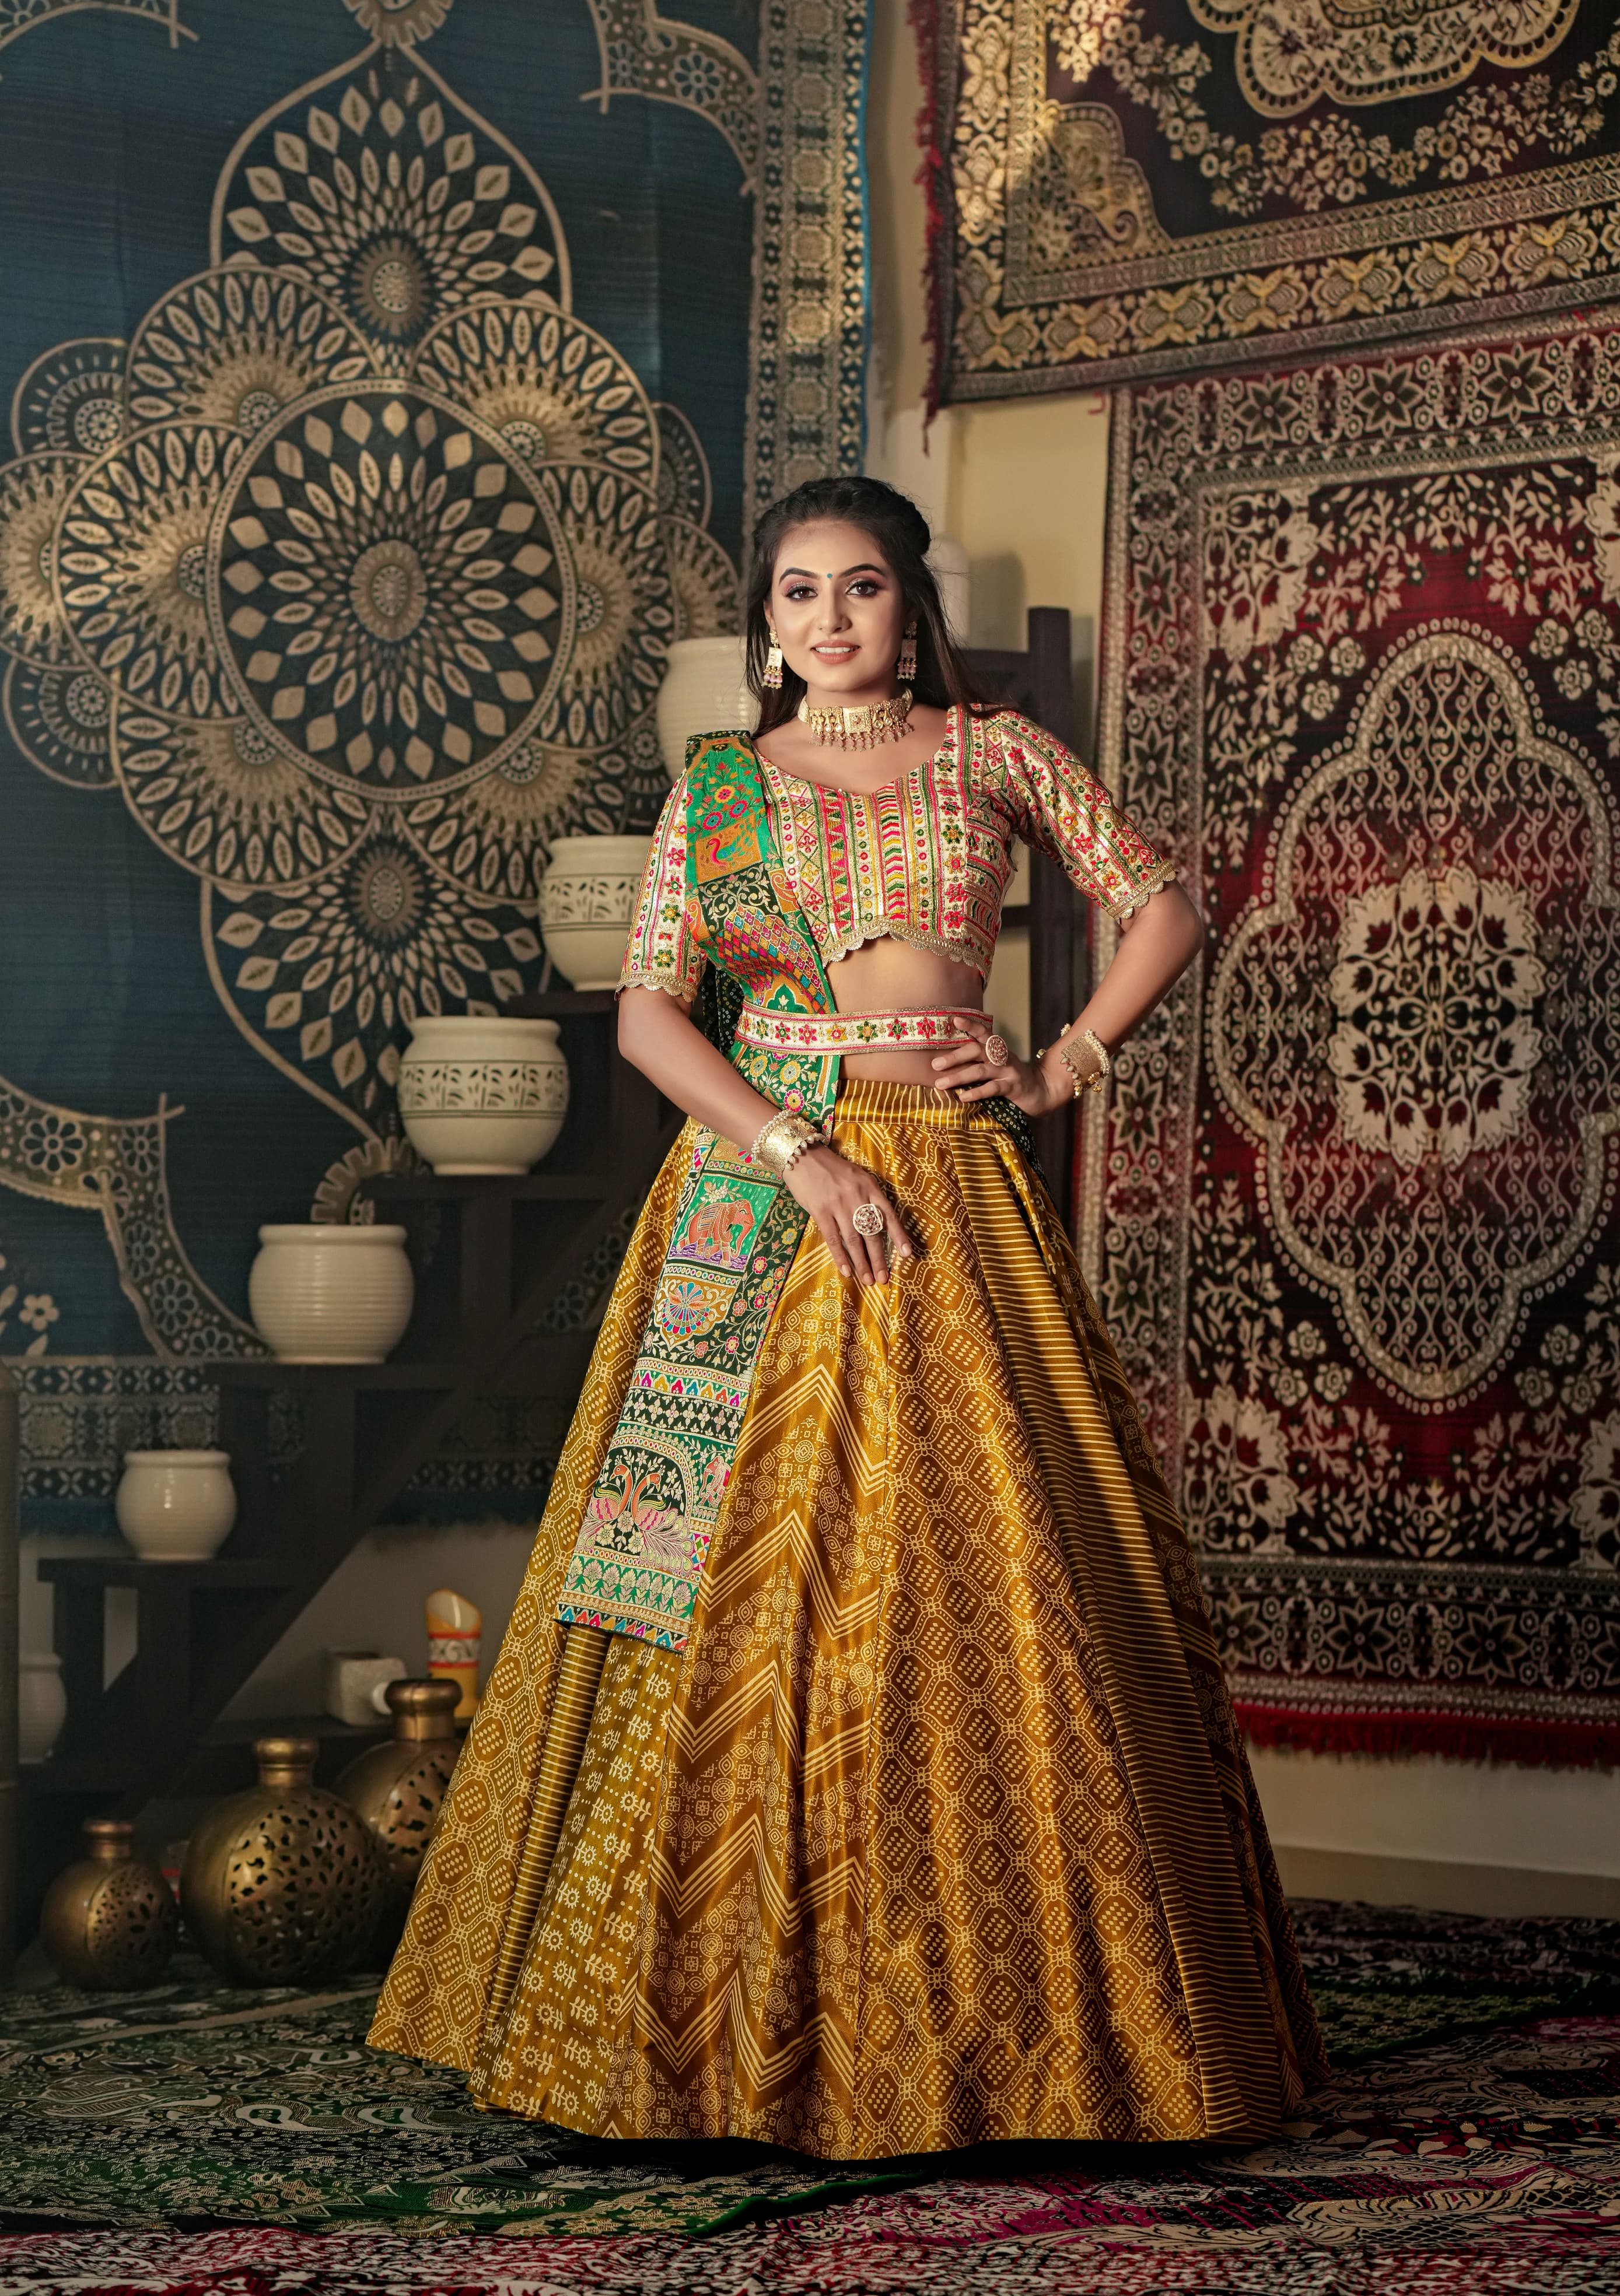 Couple Lehenga choli and men's kurta festival session and wedding season  start with new ethnic traditions Embrace the elegance of a n... | Instagram